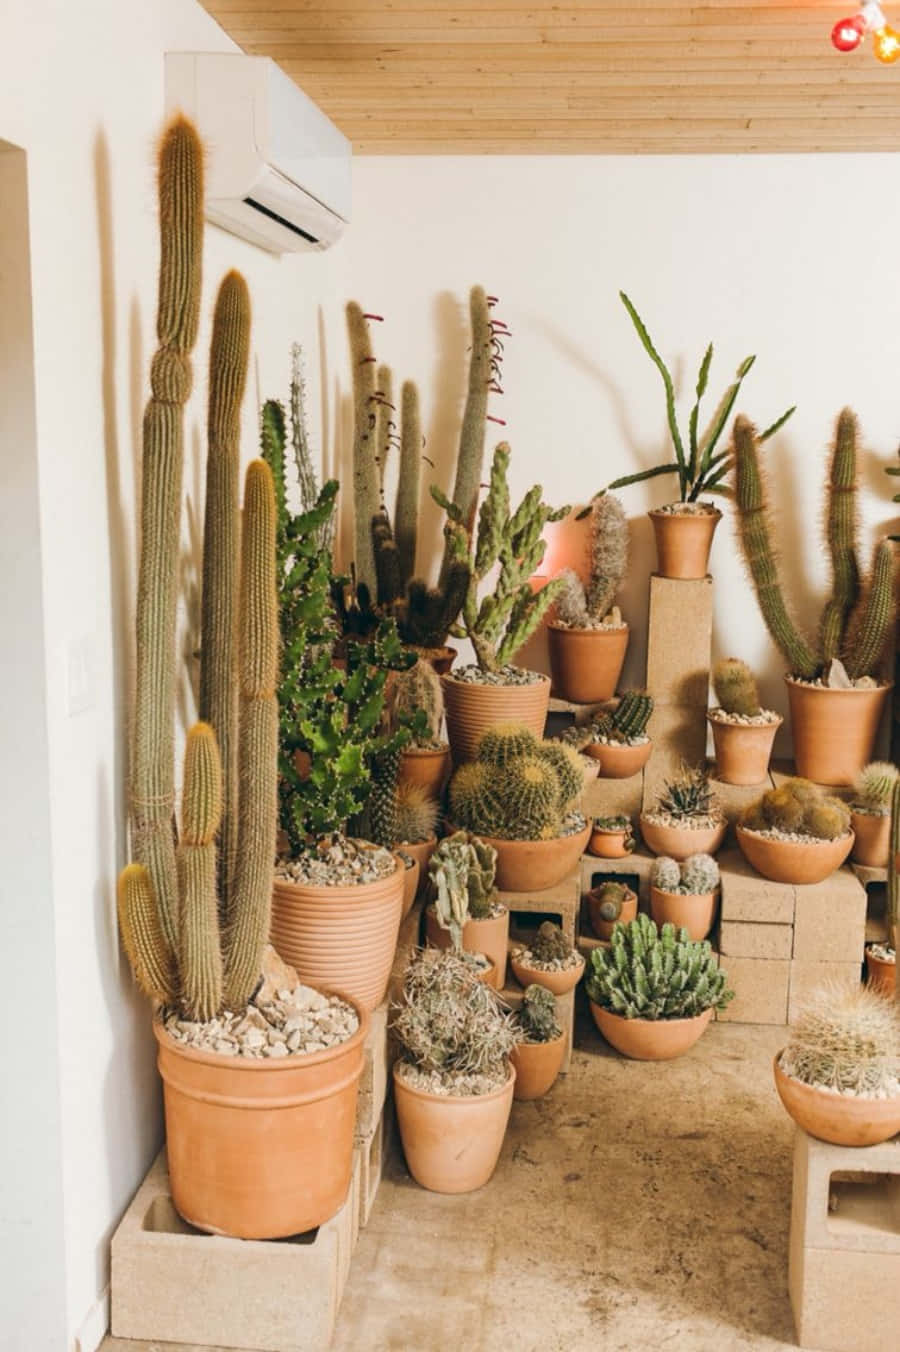 A Room Filled With Potted Cactus Plants